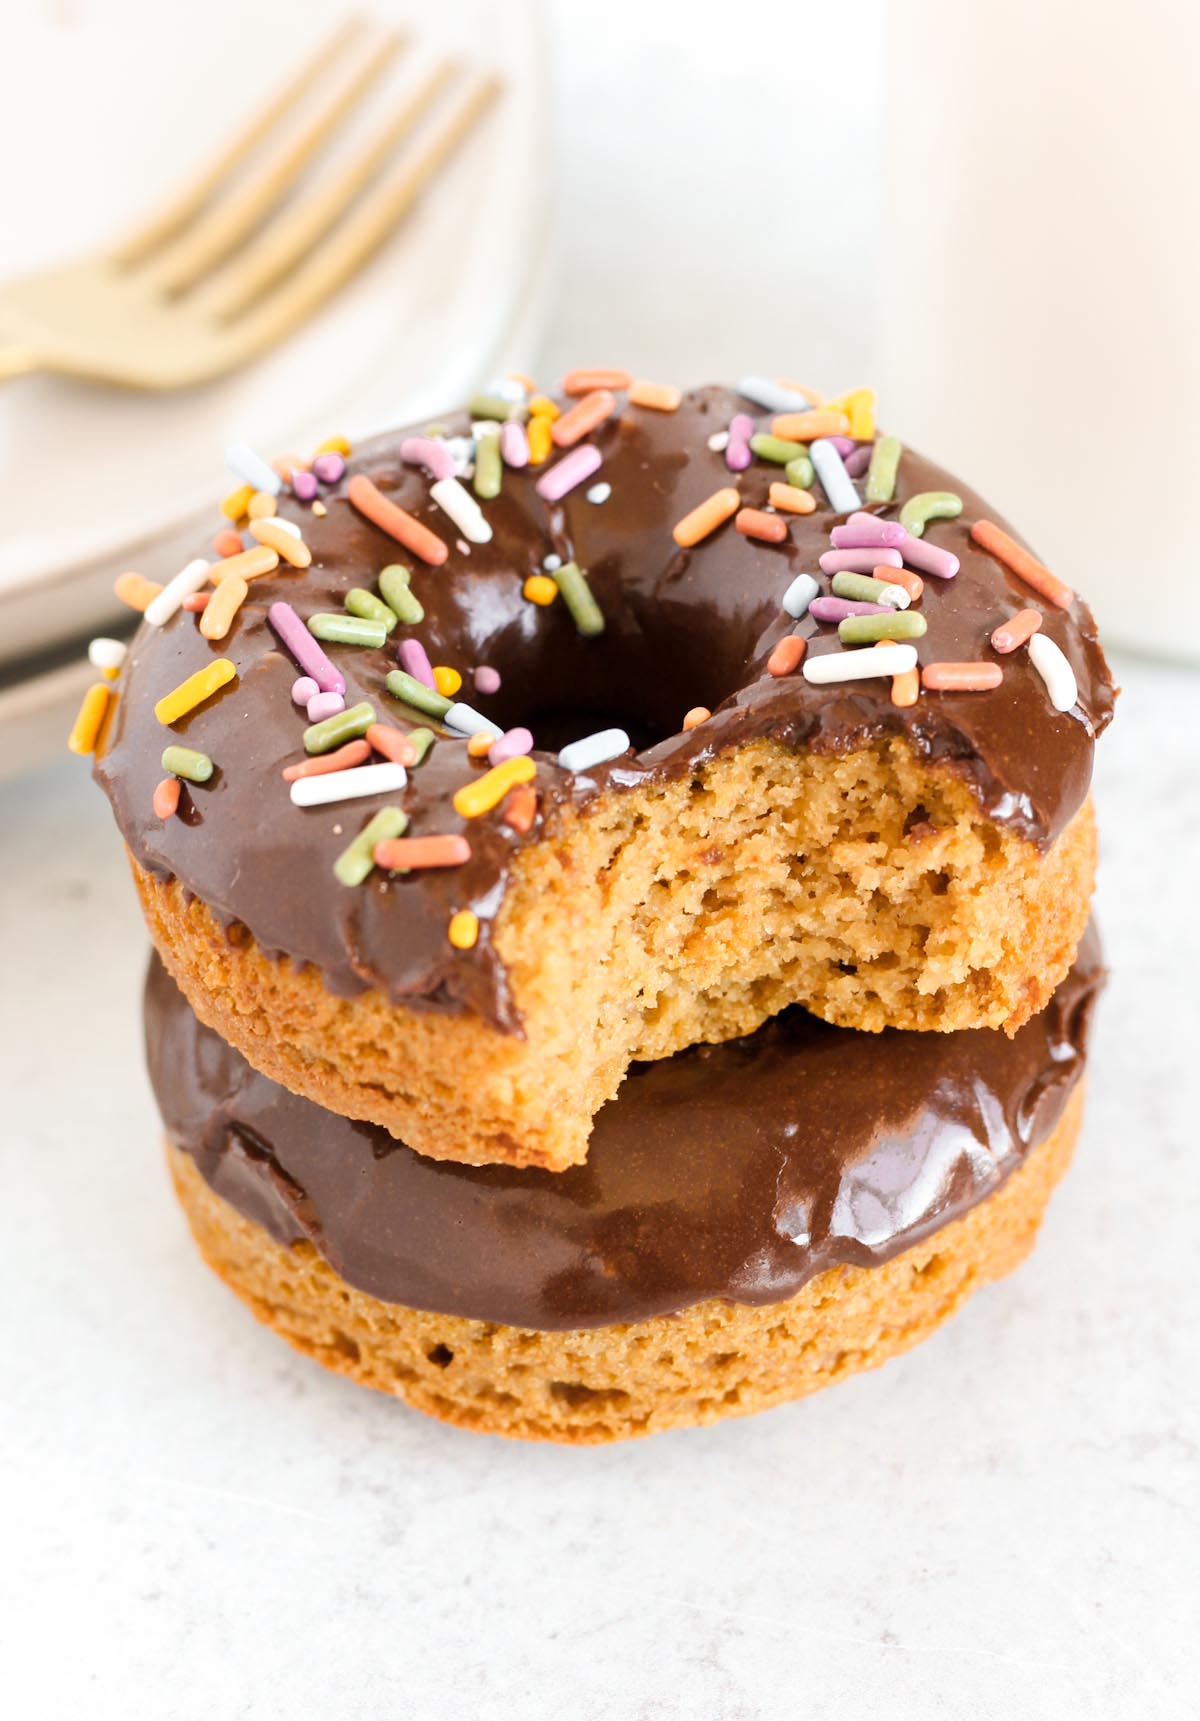 Chocolate covered donut with sprinkles with a bit taken out of it.